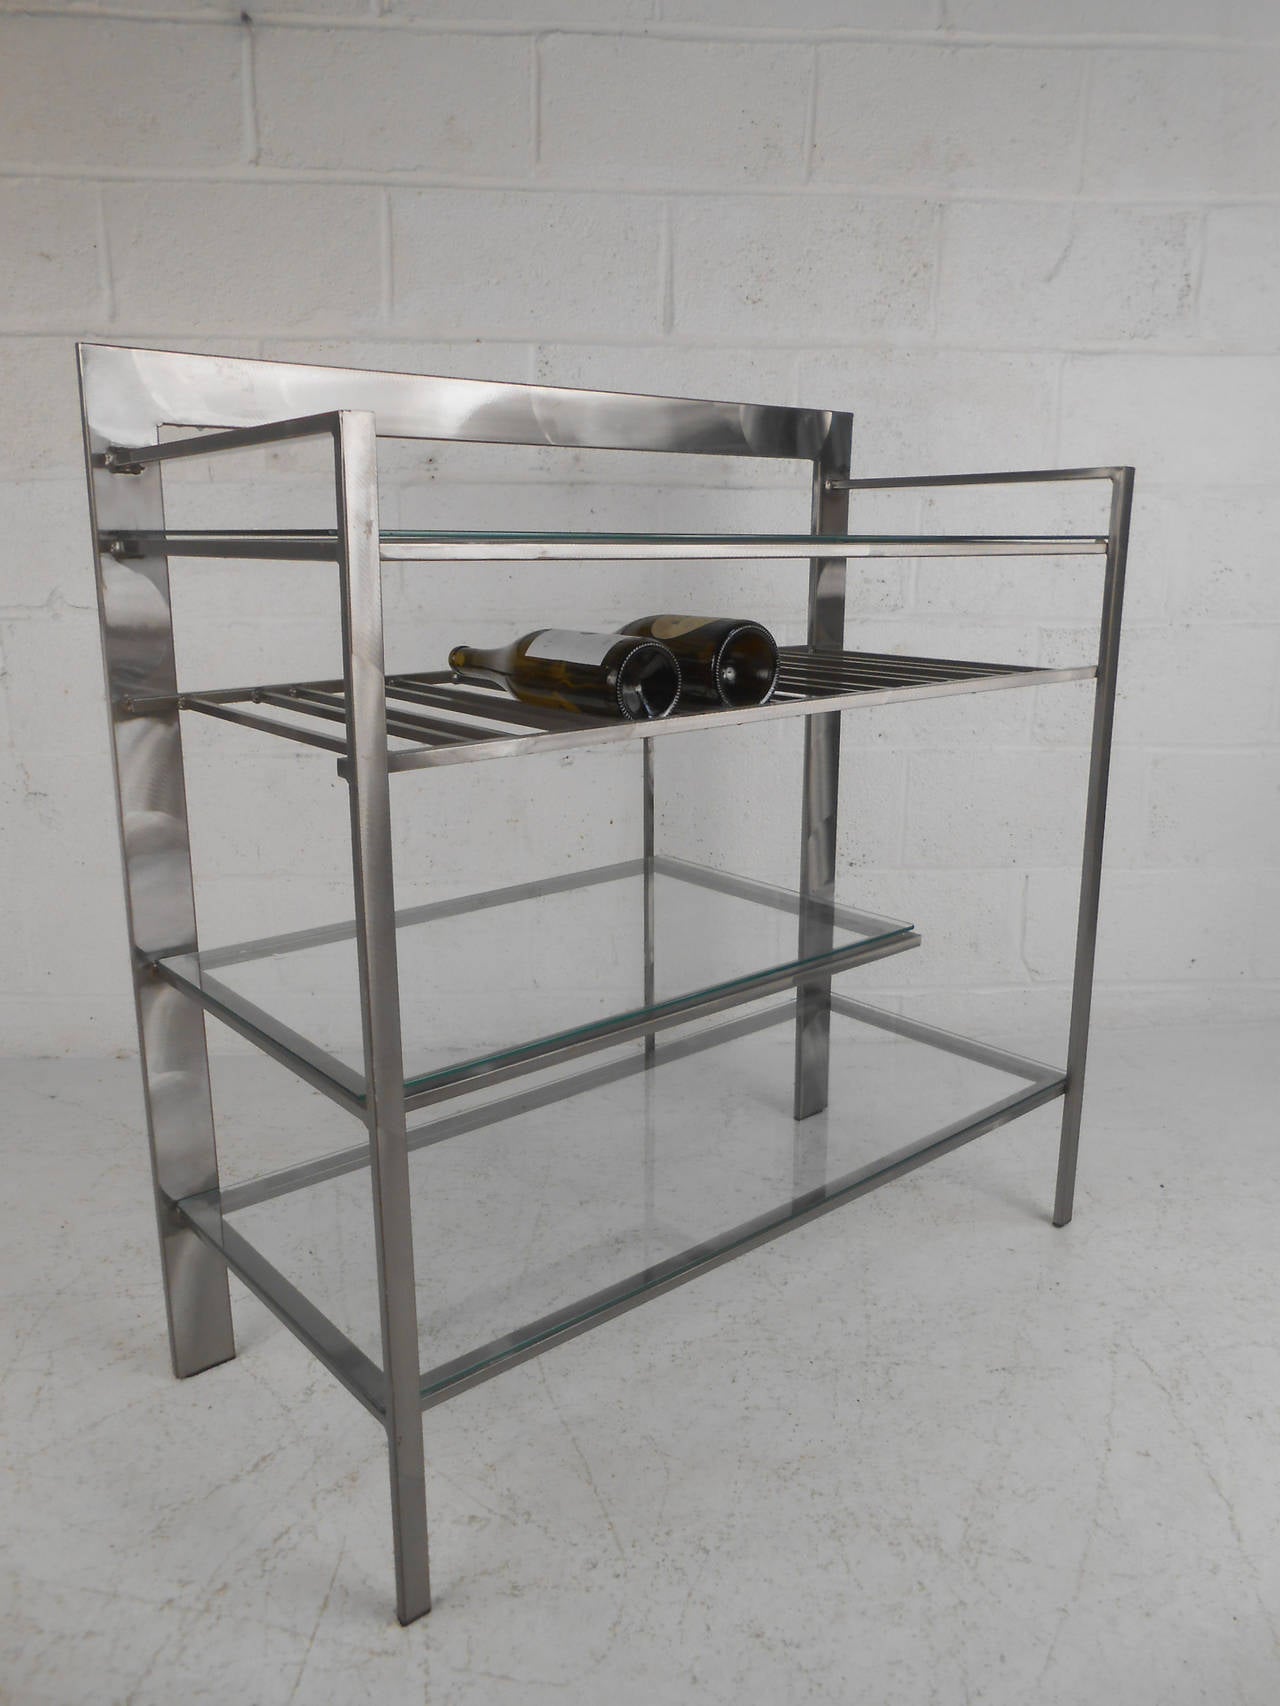 This unique side bar makes a stylish addition to any interior, perfect for storing bottles, glasses, and more. Please confirm item location (NY or NJ).